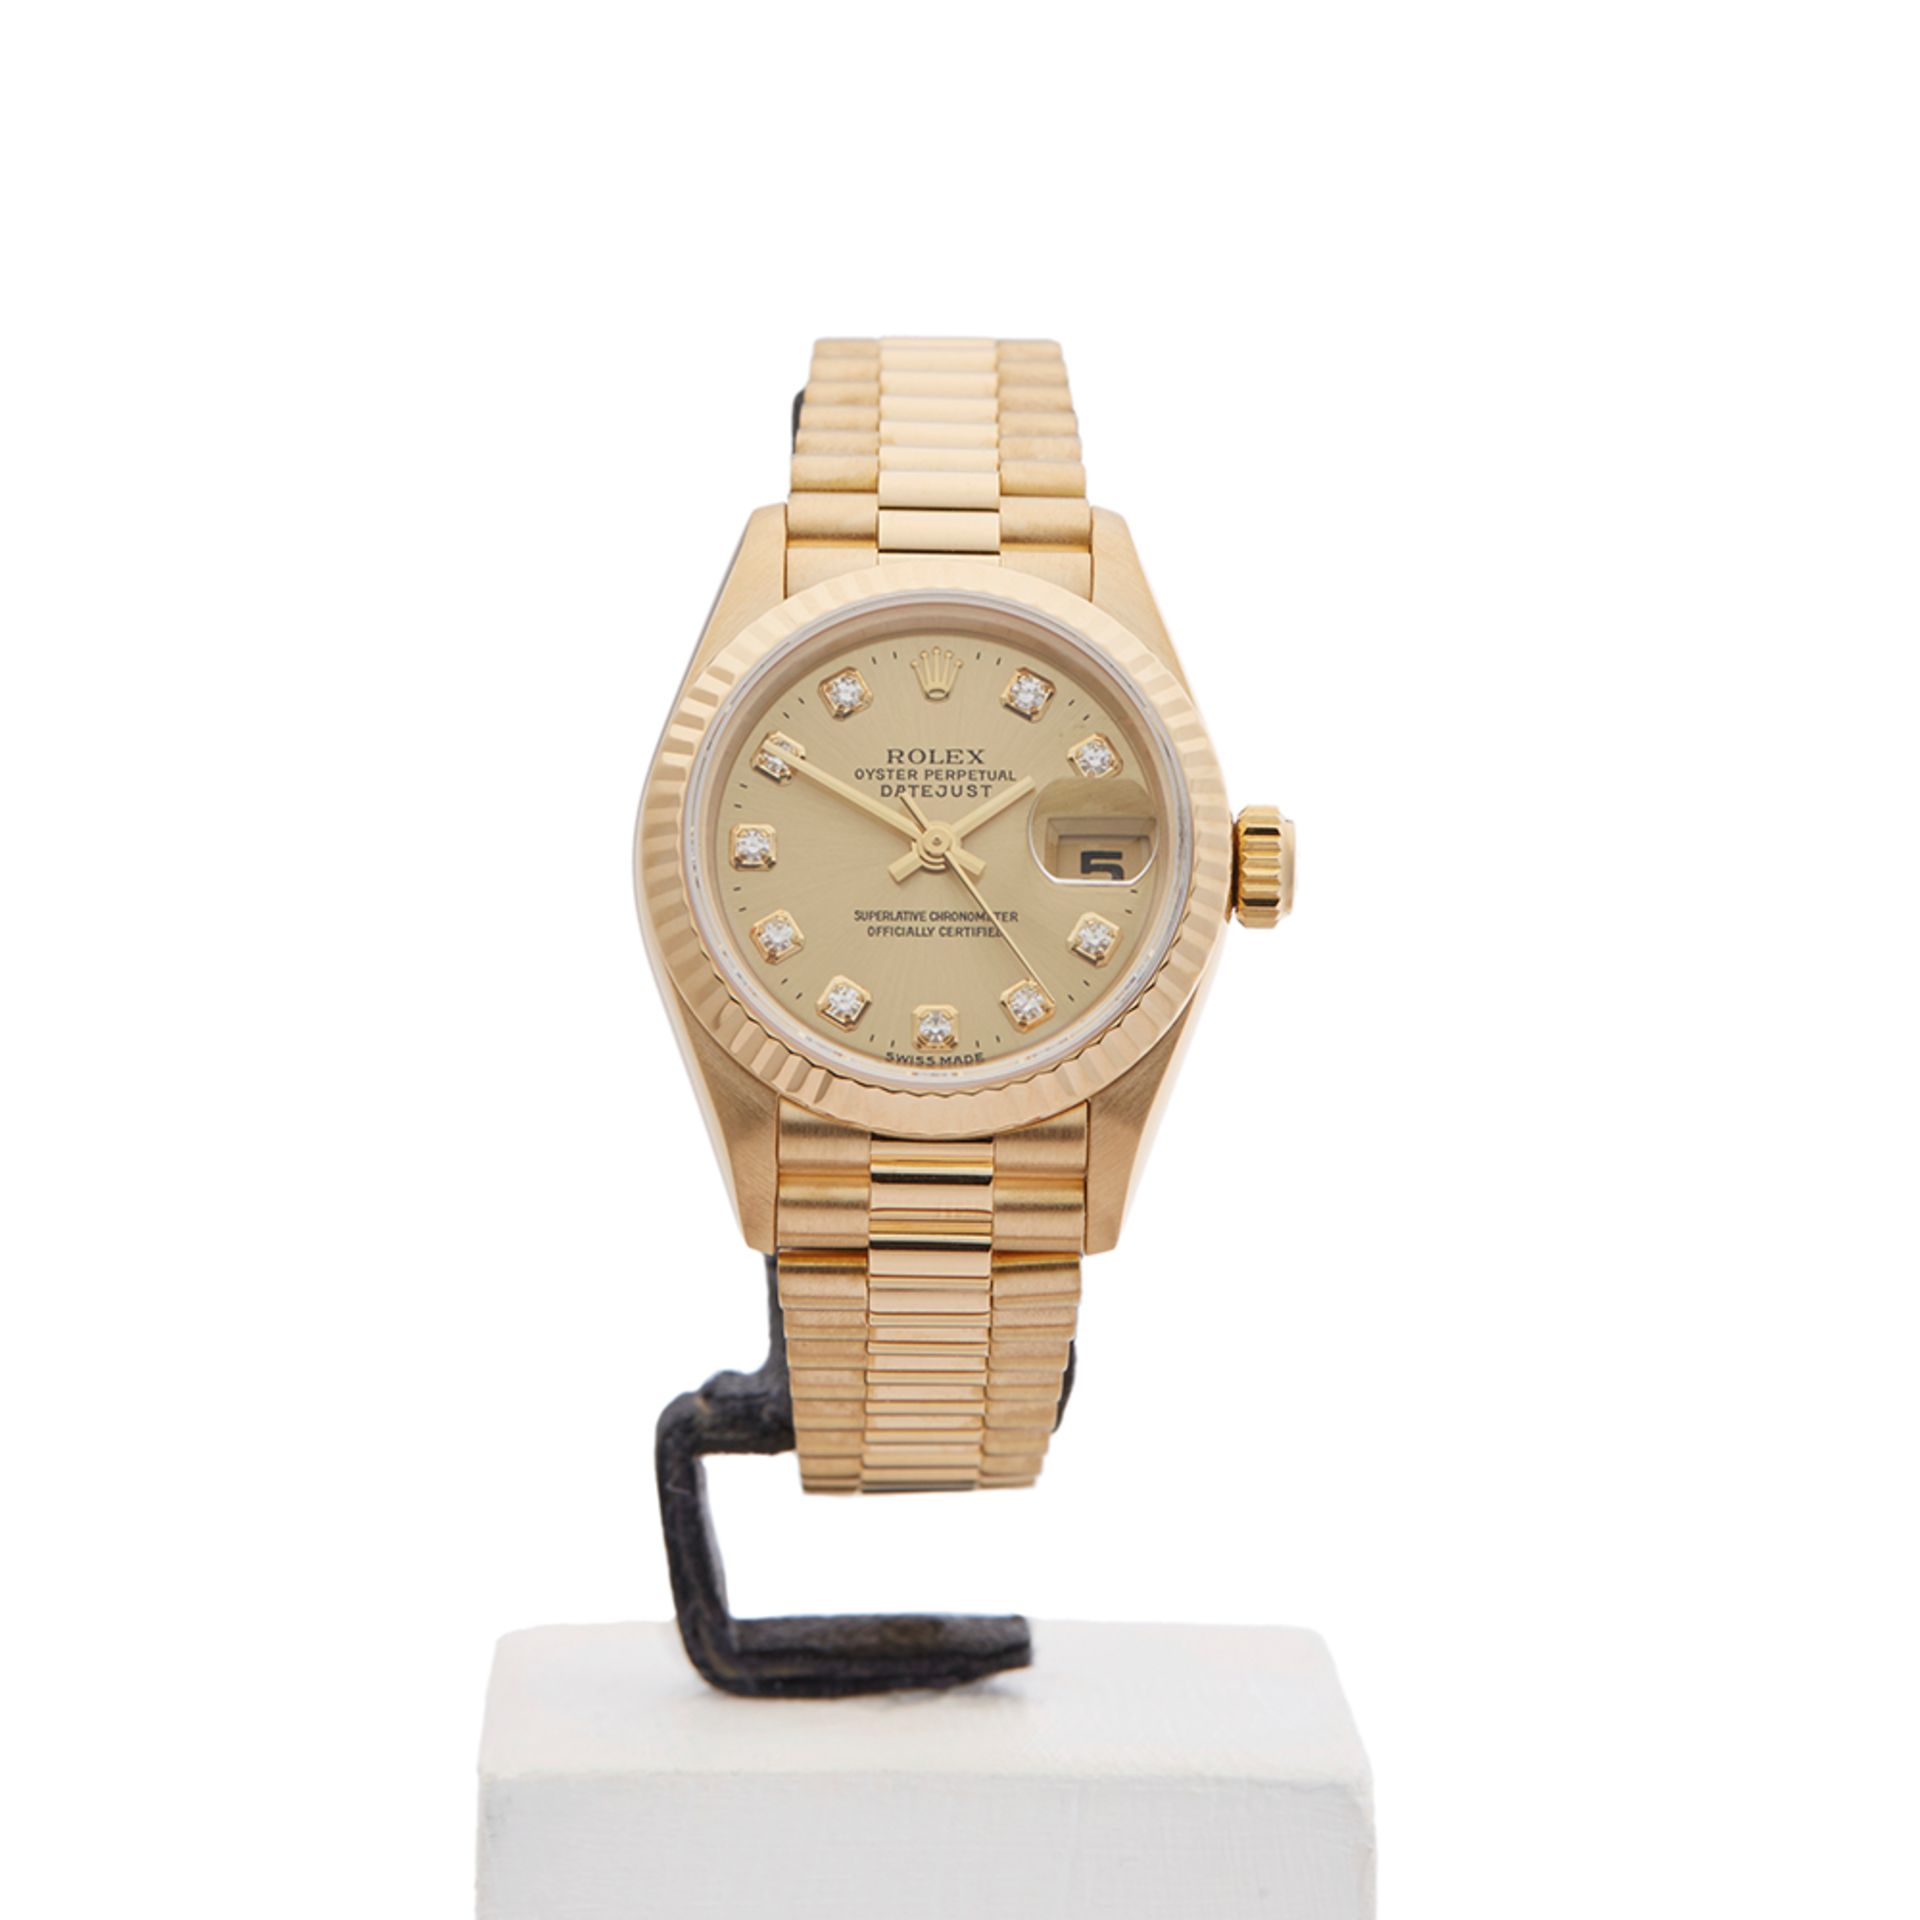 Rolex Datejust 26mm 18k Yellow Gold 69178 - Image 2 of 9